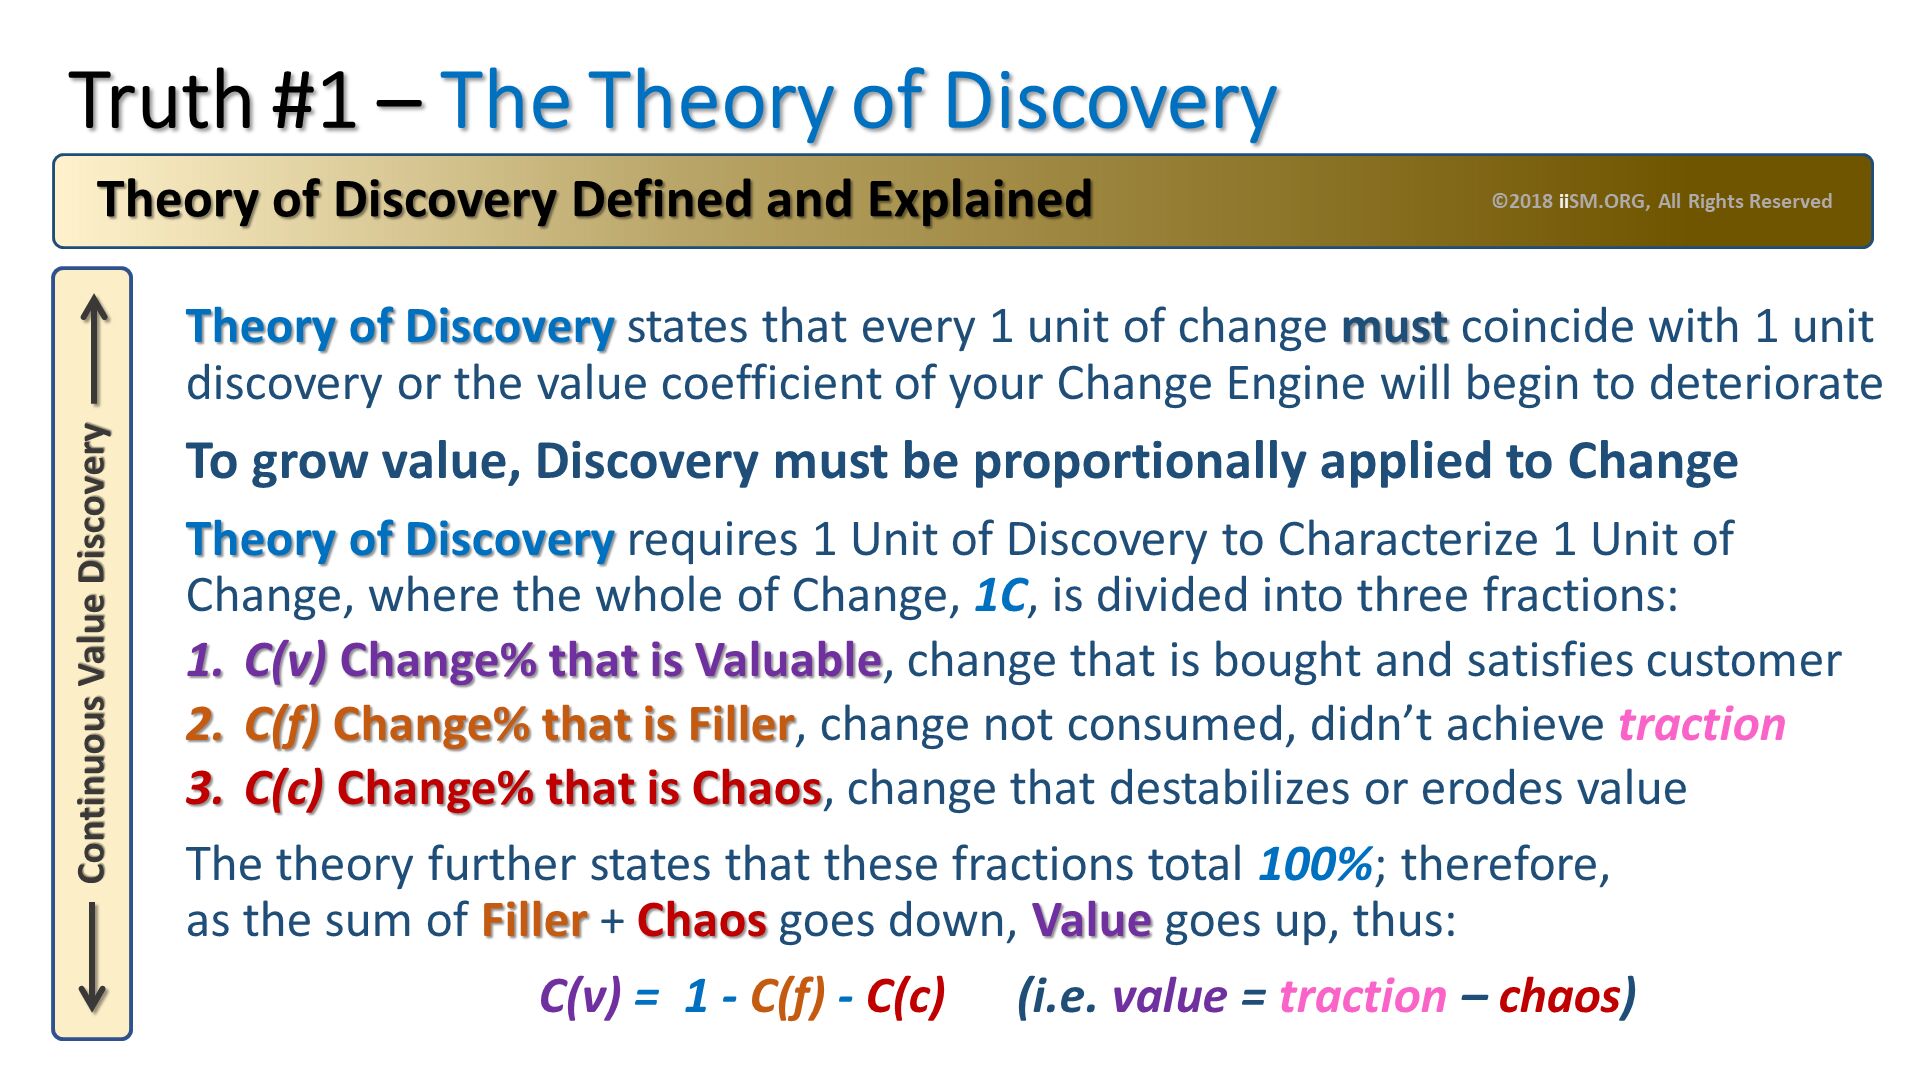 Truth #1 – The Theory of Discovery. Theory of Discovery states that every 1 unit of change must coincide with 1 unit discovery or the value coefficient of your Change Engine will begin to deteriorate
To grow value, Discovery must be proportionally applied to Change
Theory of Discovery requires 1 Unit of Discovery to Characterize 1 Unit of Change, where the whole of Change, 1C, is divided into three fractions:
C(v) Change% that is Valuable, change that is bought and satisfies customer
C(f) Change% that is Filler, change not consumed, didn’t achieve traction
C(c) Change% that is Chaos, change that destabilizes or erodes value
The theory further states that these fractions total 100%; therefore, as the sum of Filler + Chaos goes down, Value goes up, thus:
                              C(v) =  1 - C(f) - C(c)      (i.e. value = traction – chaos).   Theory of Discovery Defined and Explained. ©2018 iiSM.ORG, All Rights Reserved. 